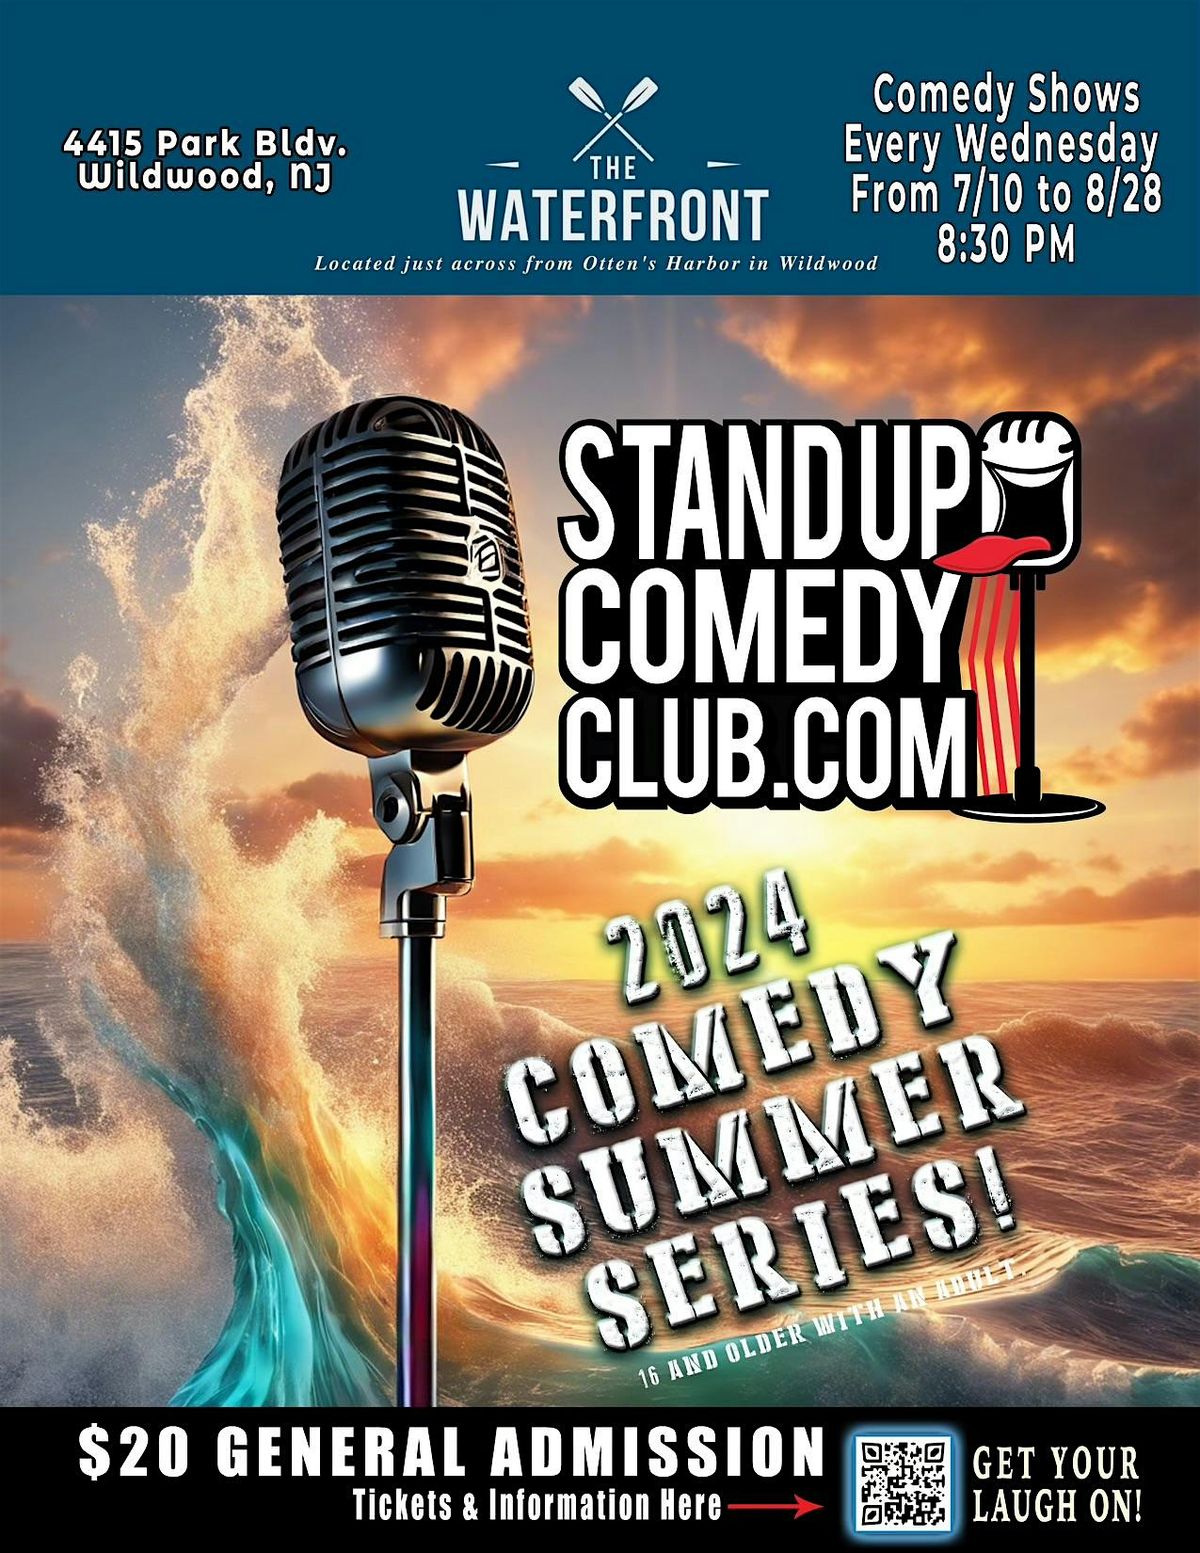 Comedy Every Wed in Wildwood NJ at The Waterfront. 8:30 pm